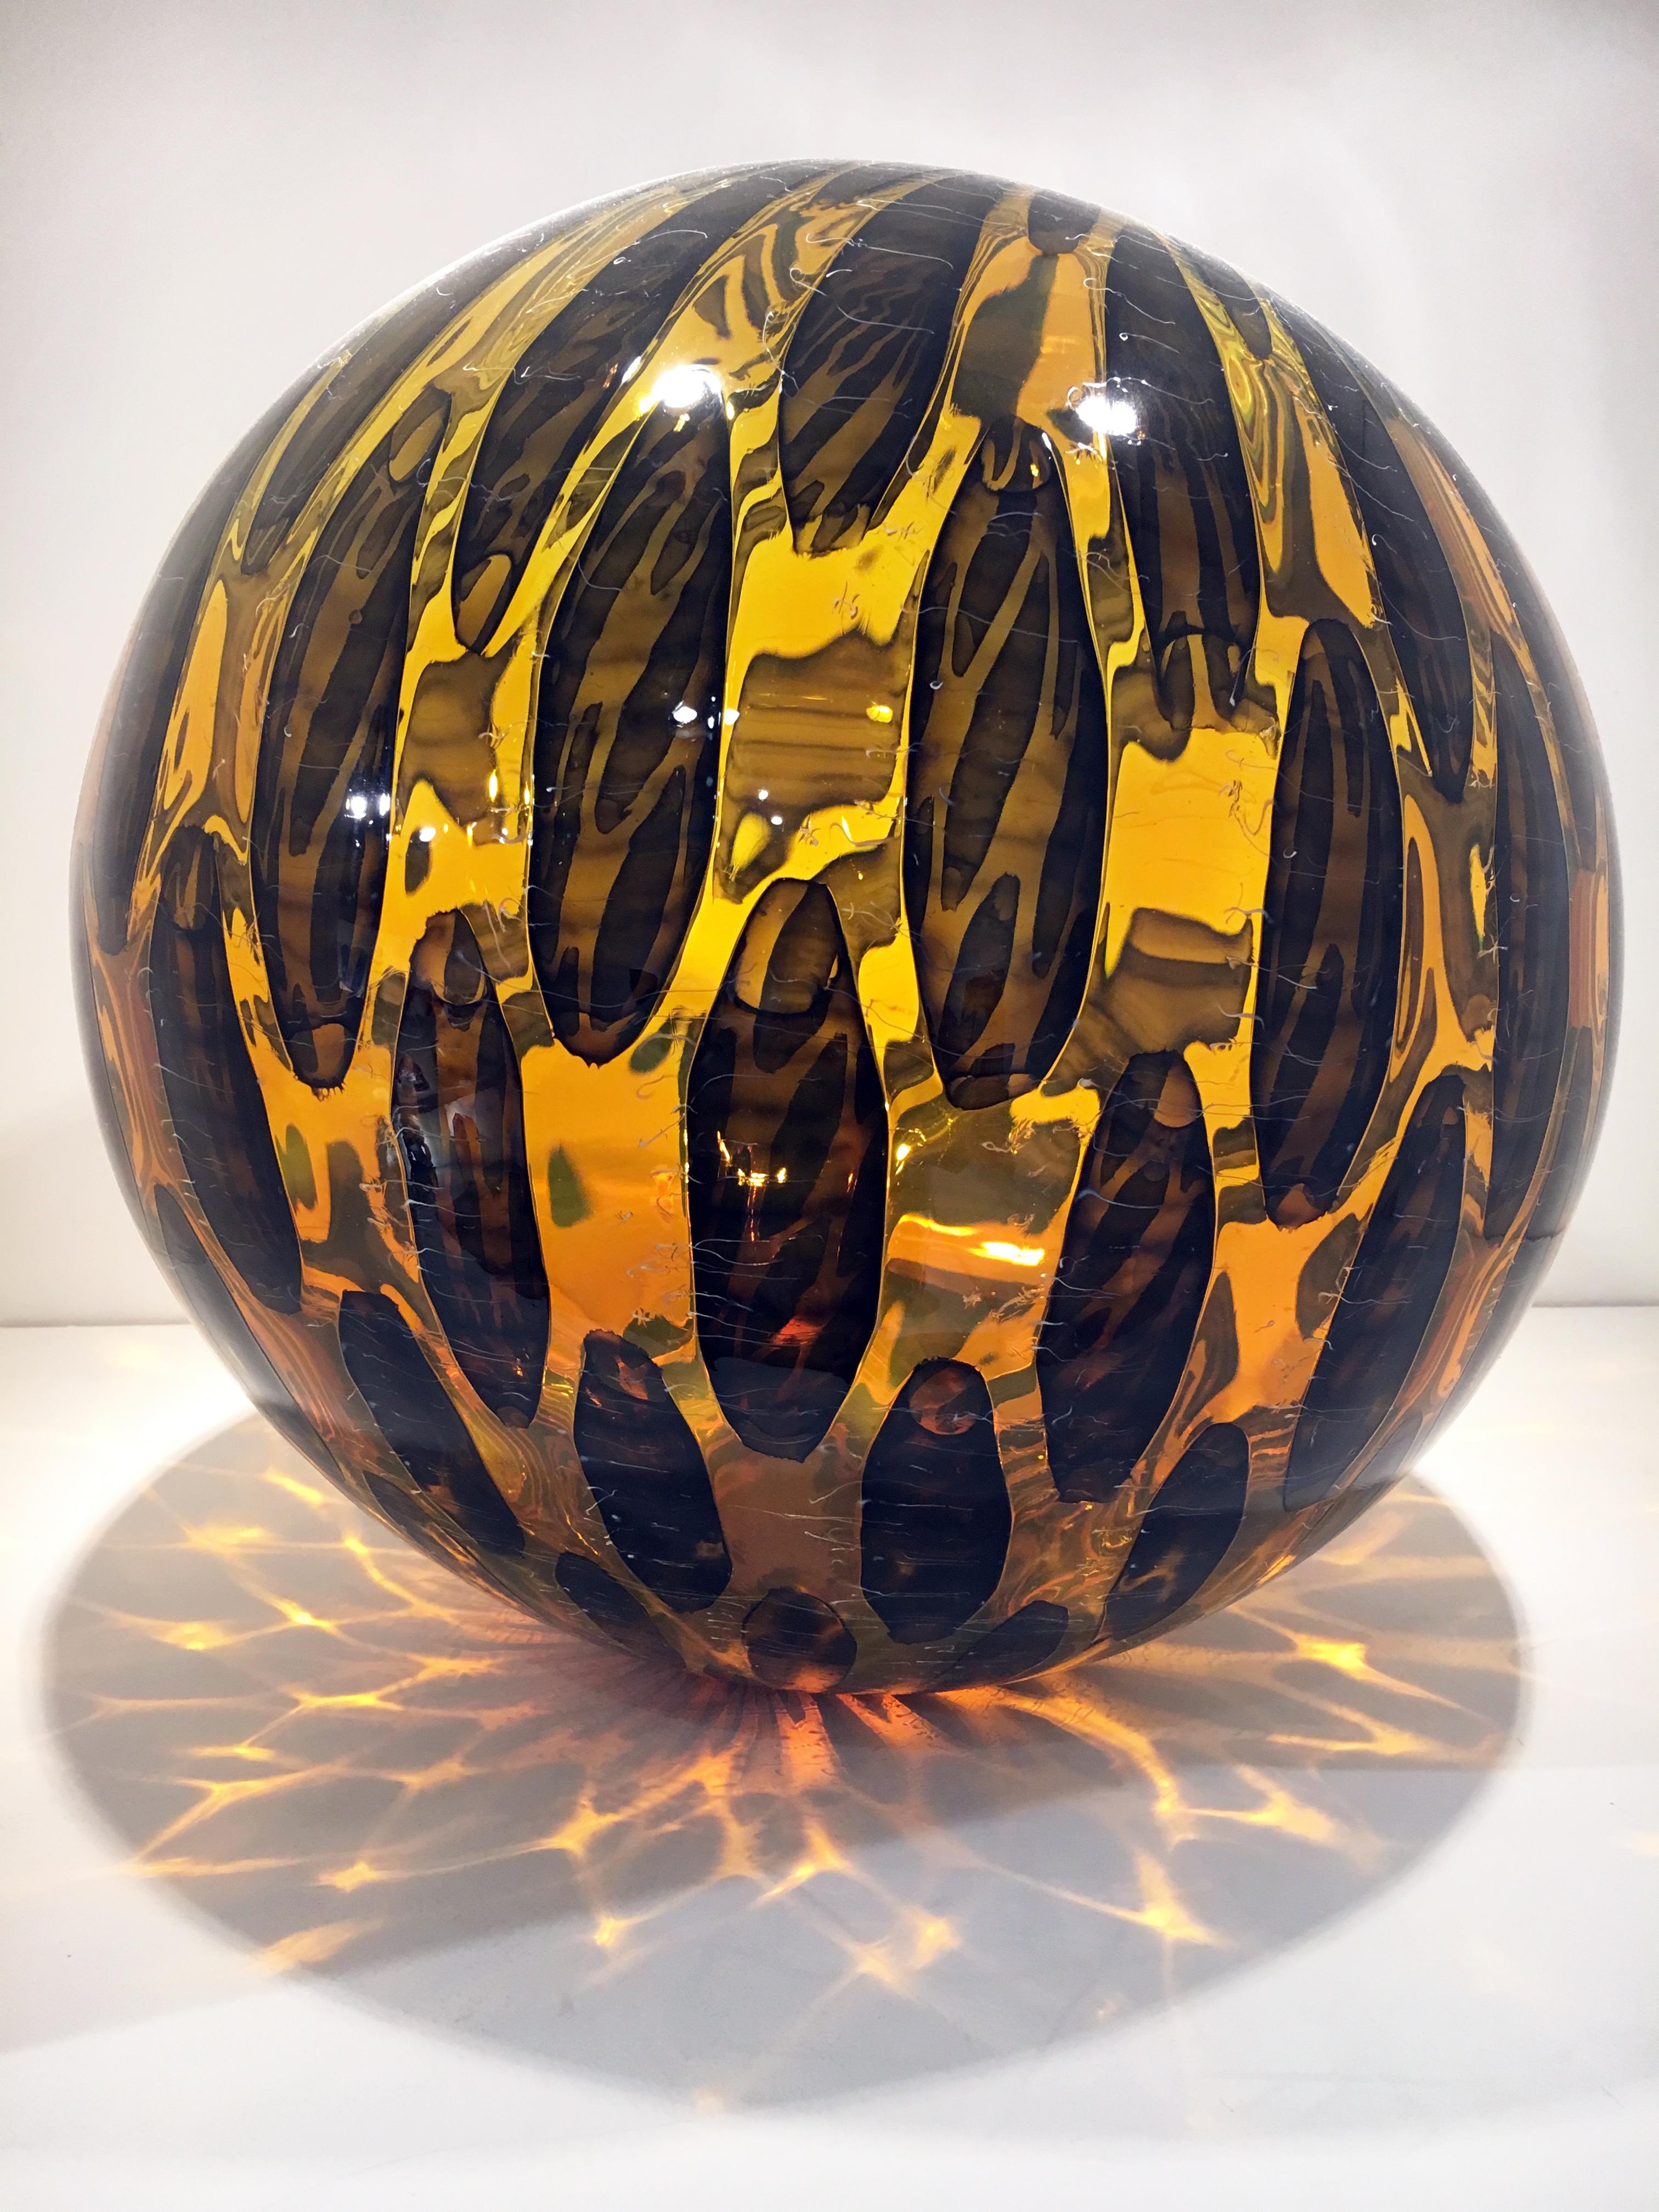 Nancy Callan Abstract Sculpture - "Amber Shimmer Orb", Contemporary Blown Glass Sculpture with Patterning